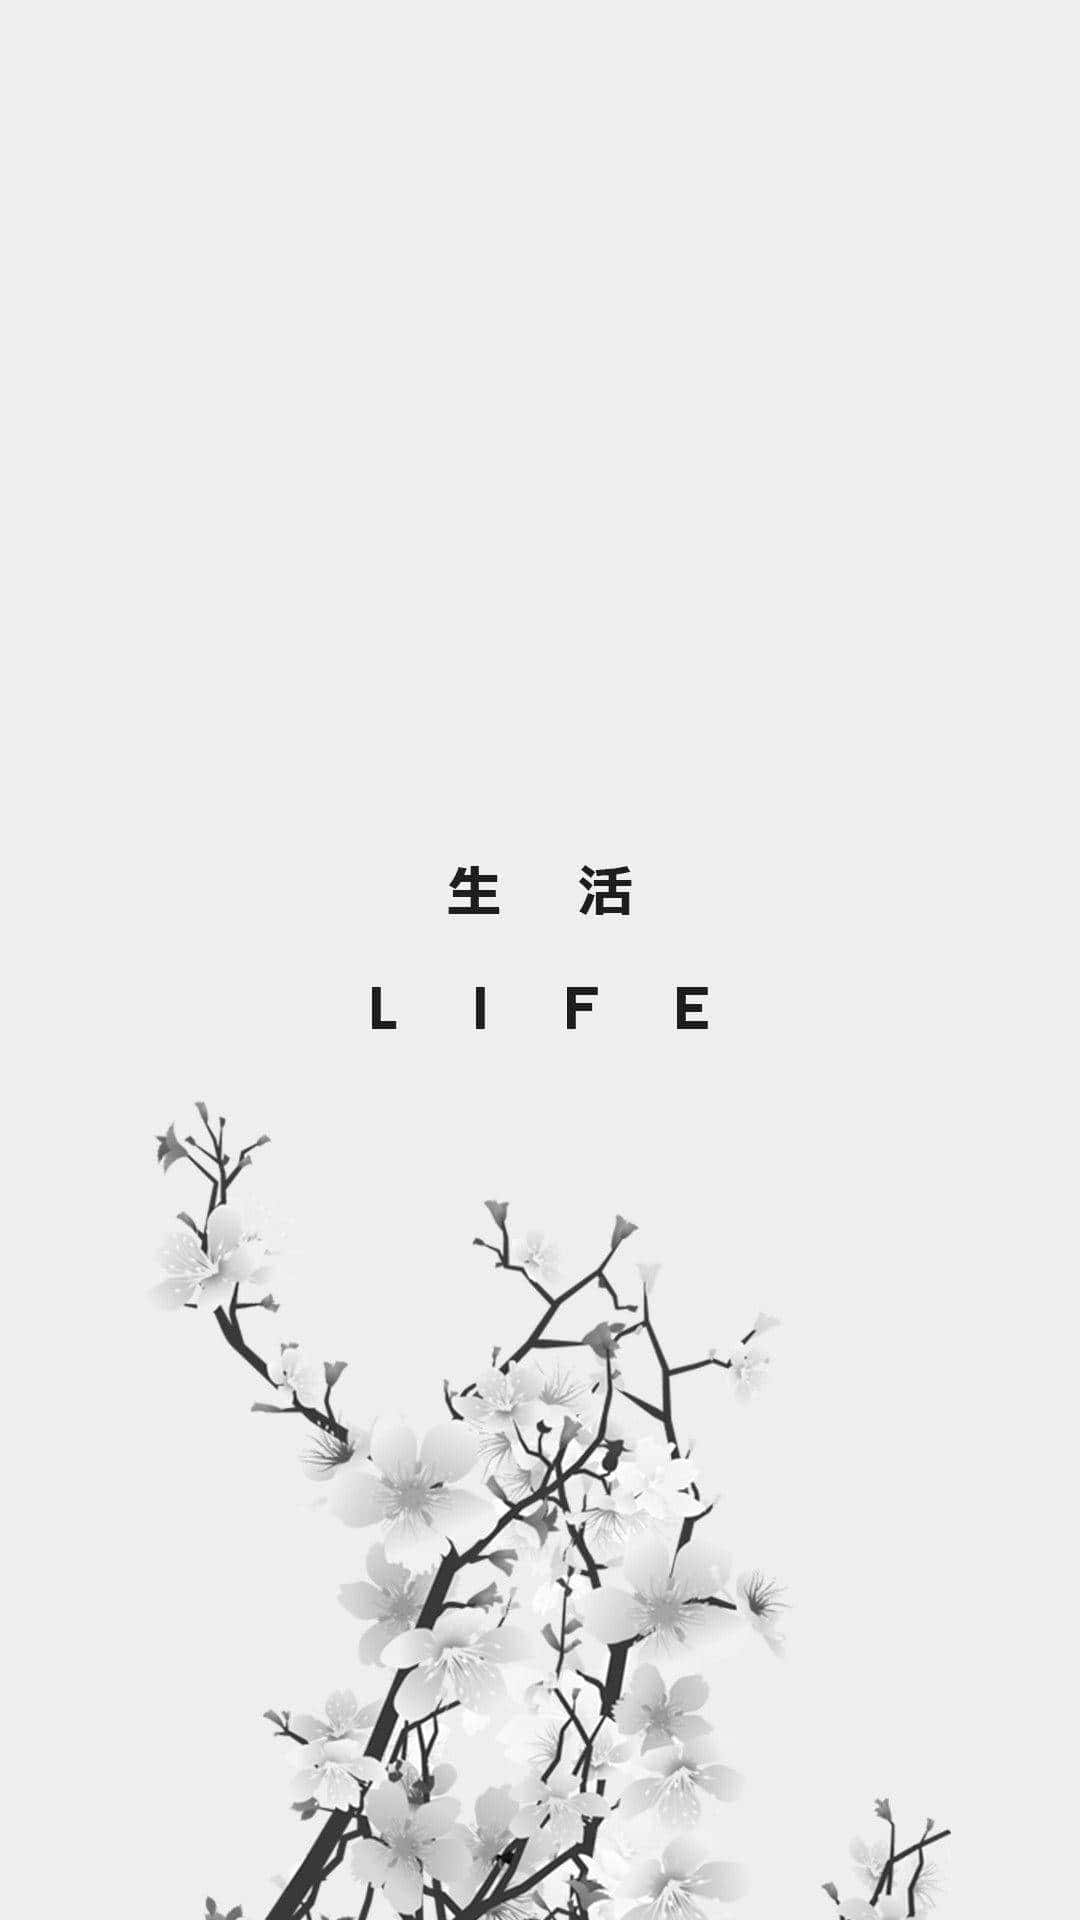 A Black And White Image Of A Tree With The Word Life Background